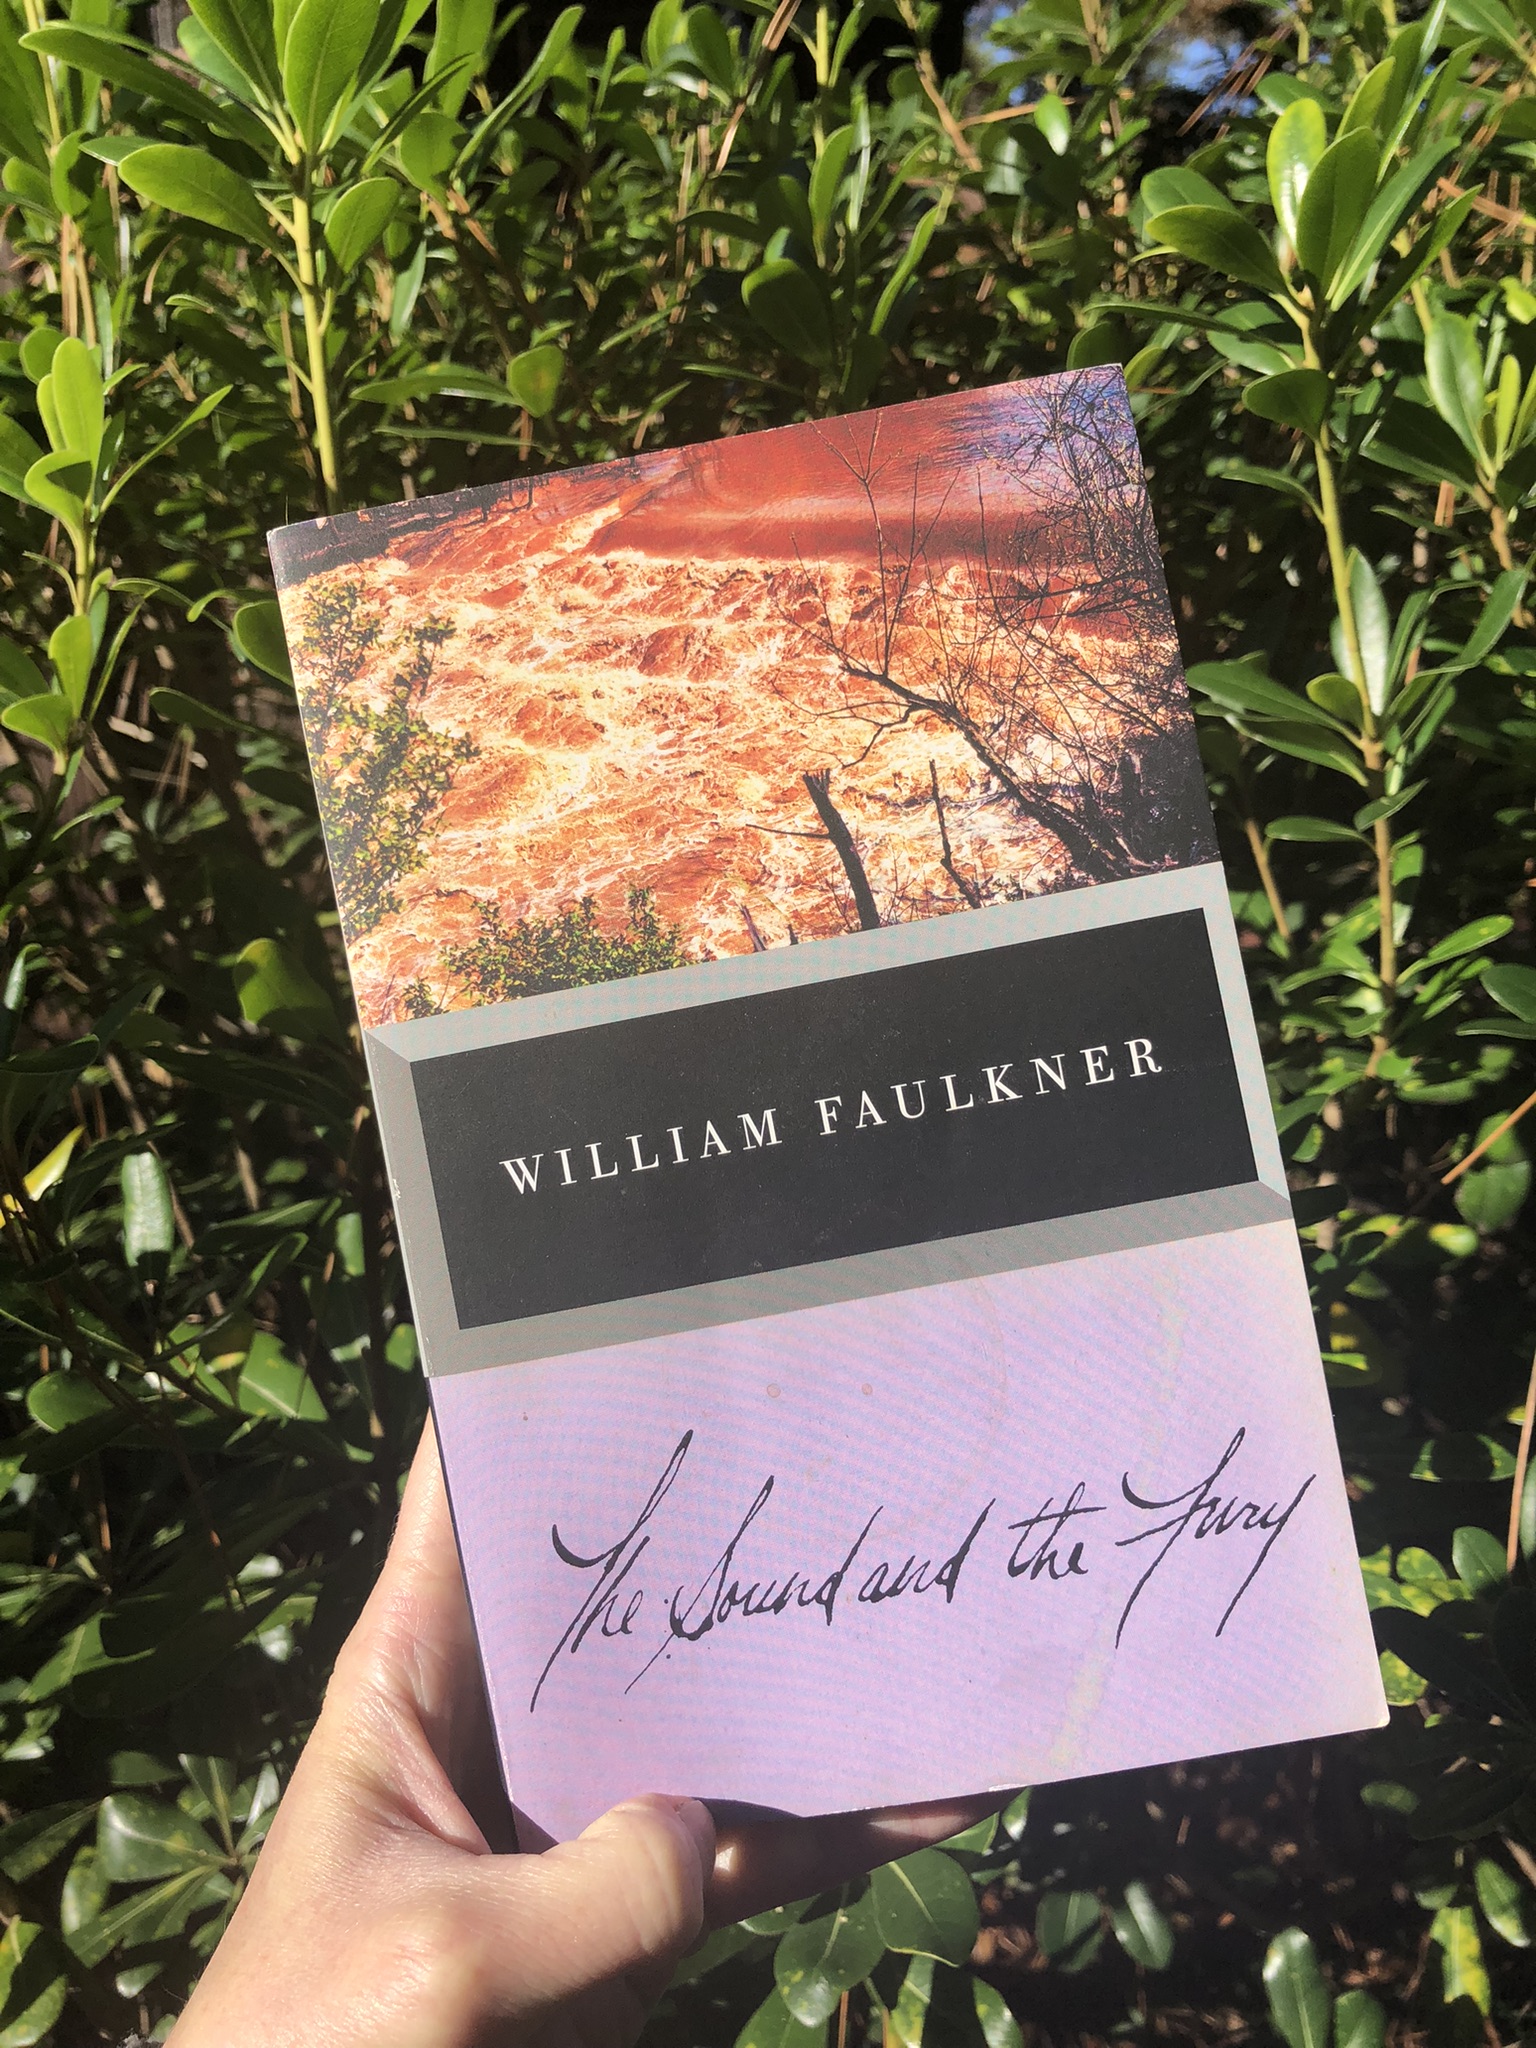 Cover of William Faulkner's novel The Sound and the Fury in front of greenery